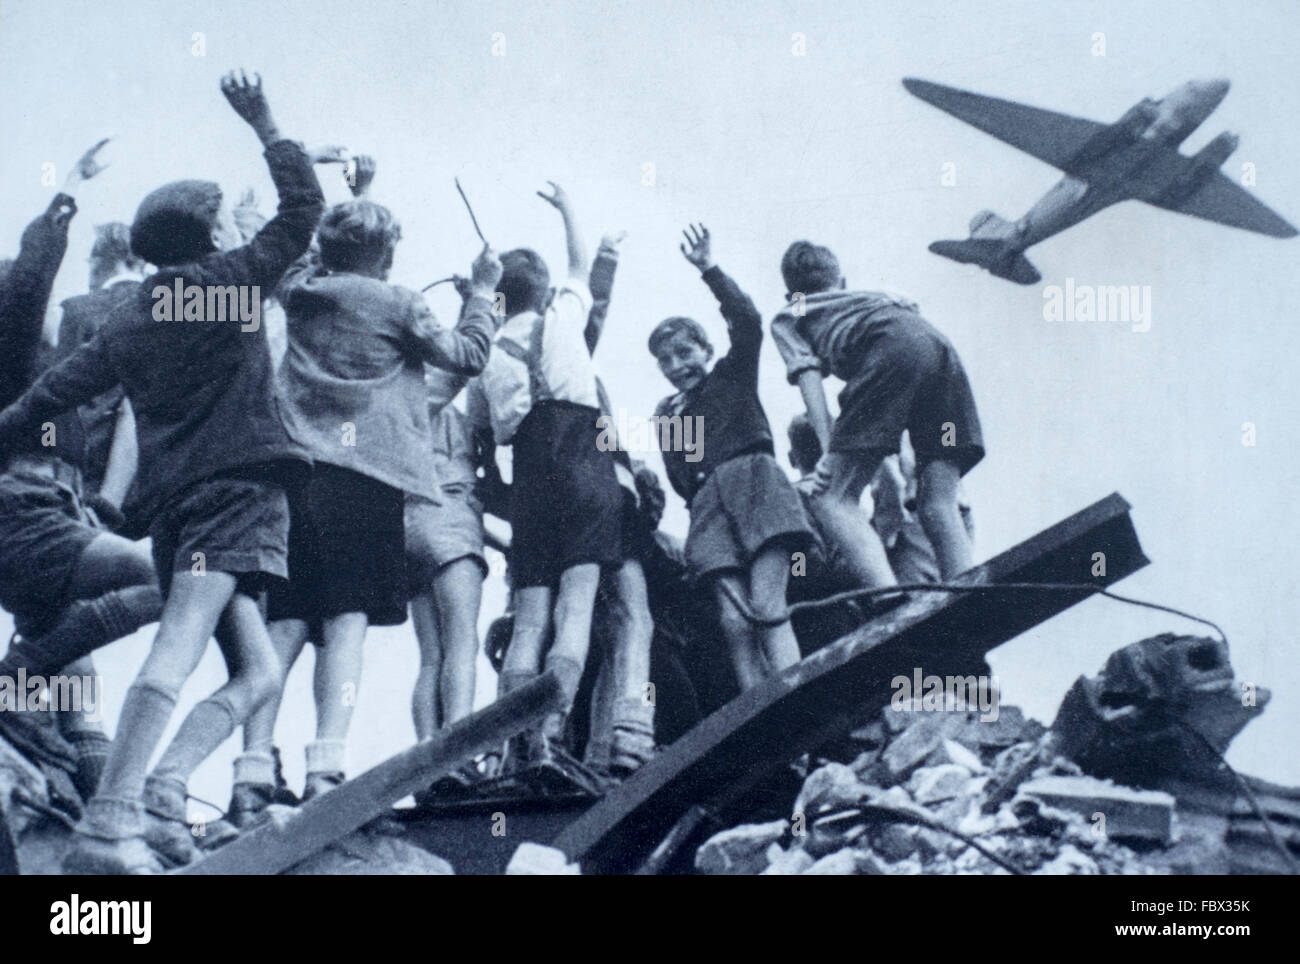 Historic image of the Berlin airlift, which is part of a large outdoor display close to Checkpoint Charlie in Berlin, Germany Stock Photo